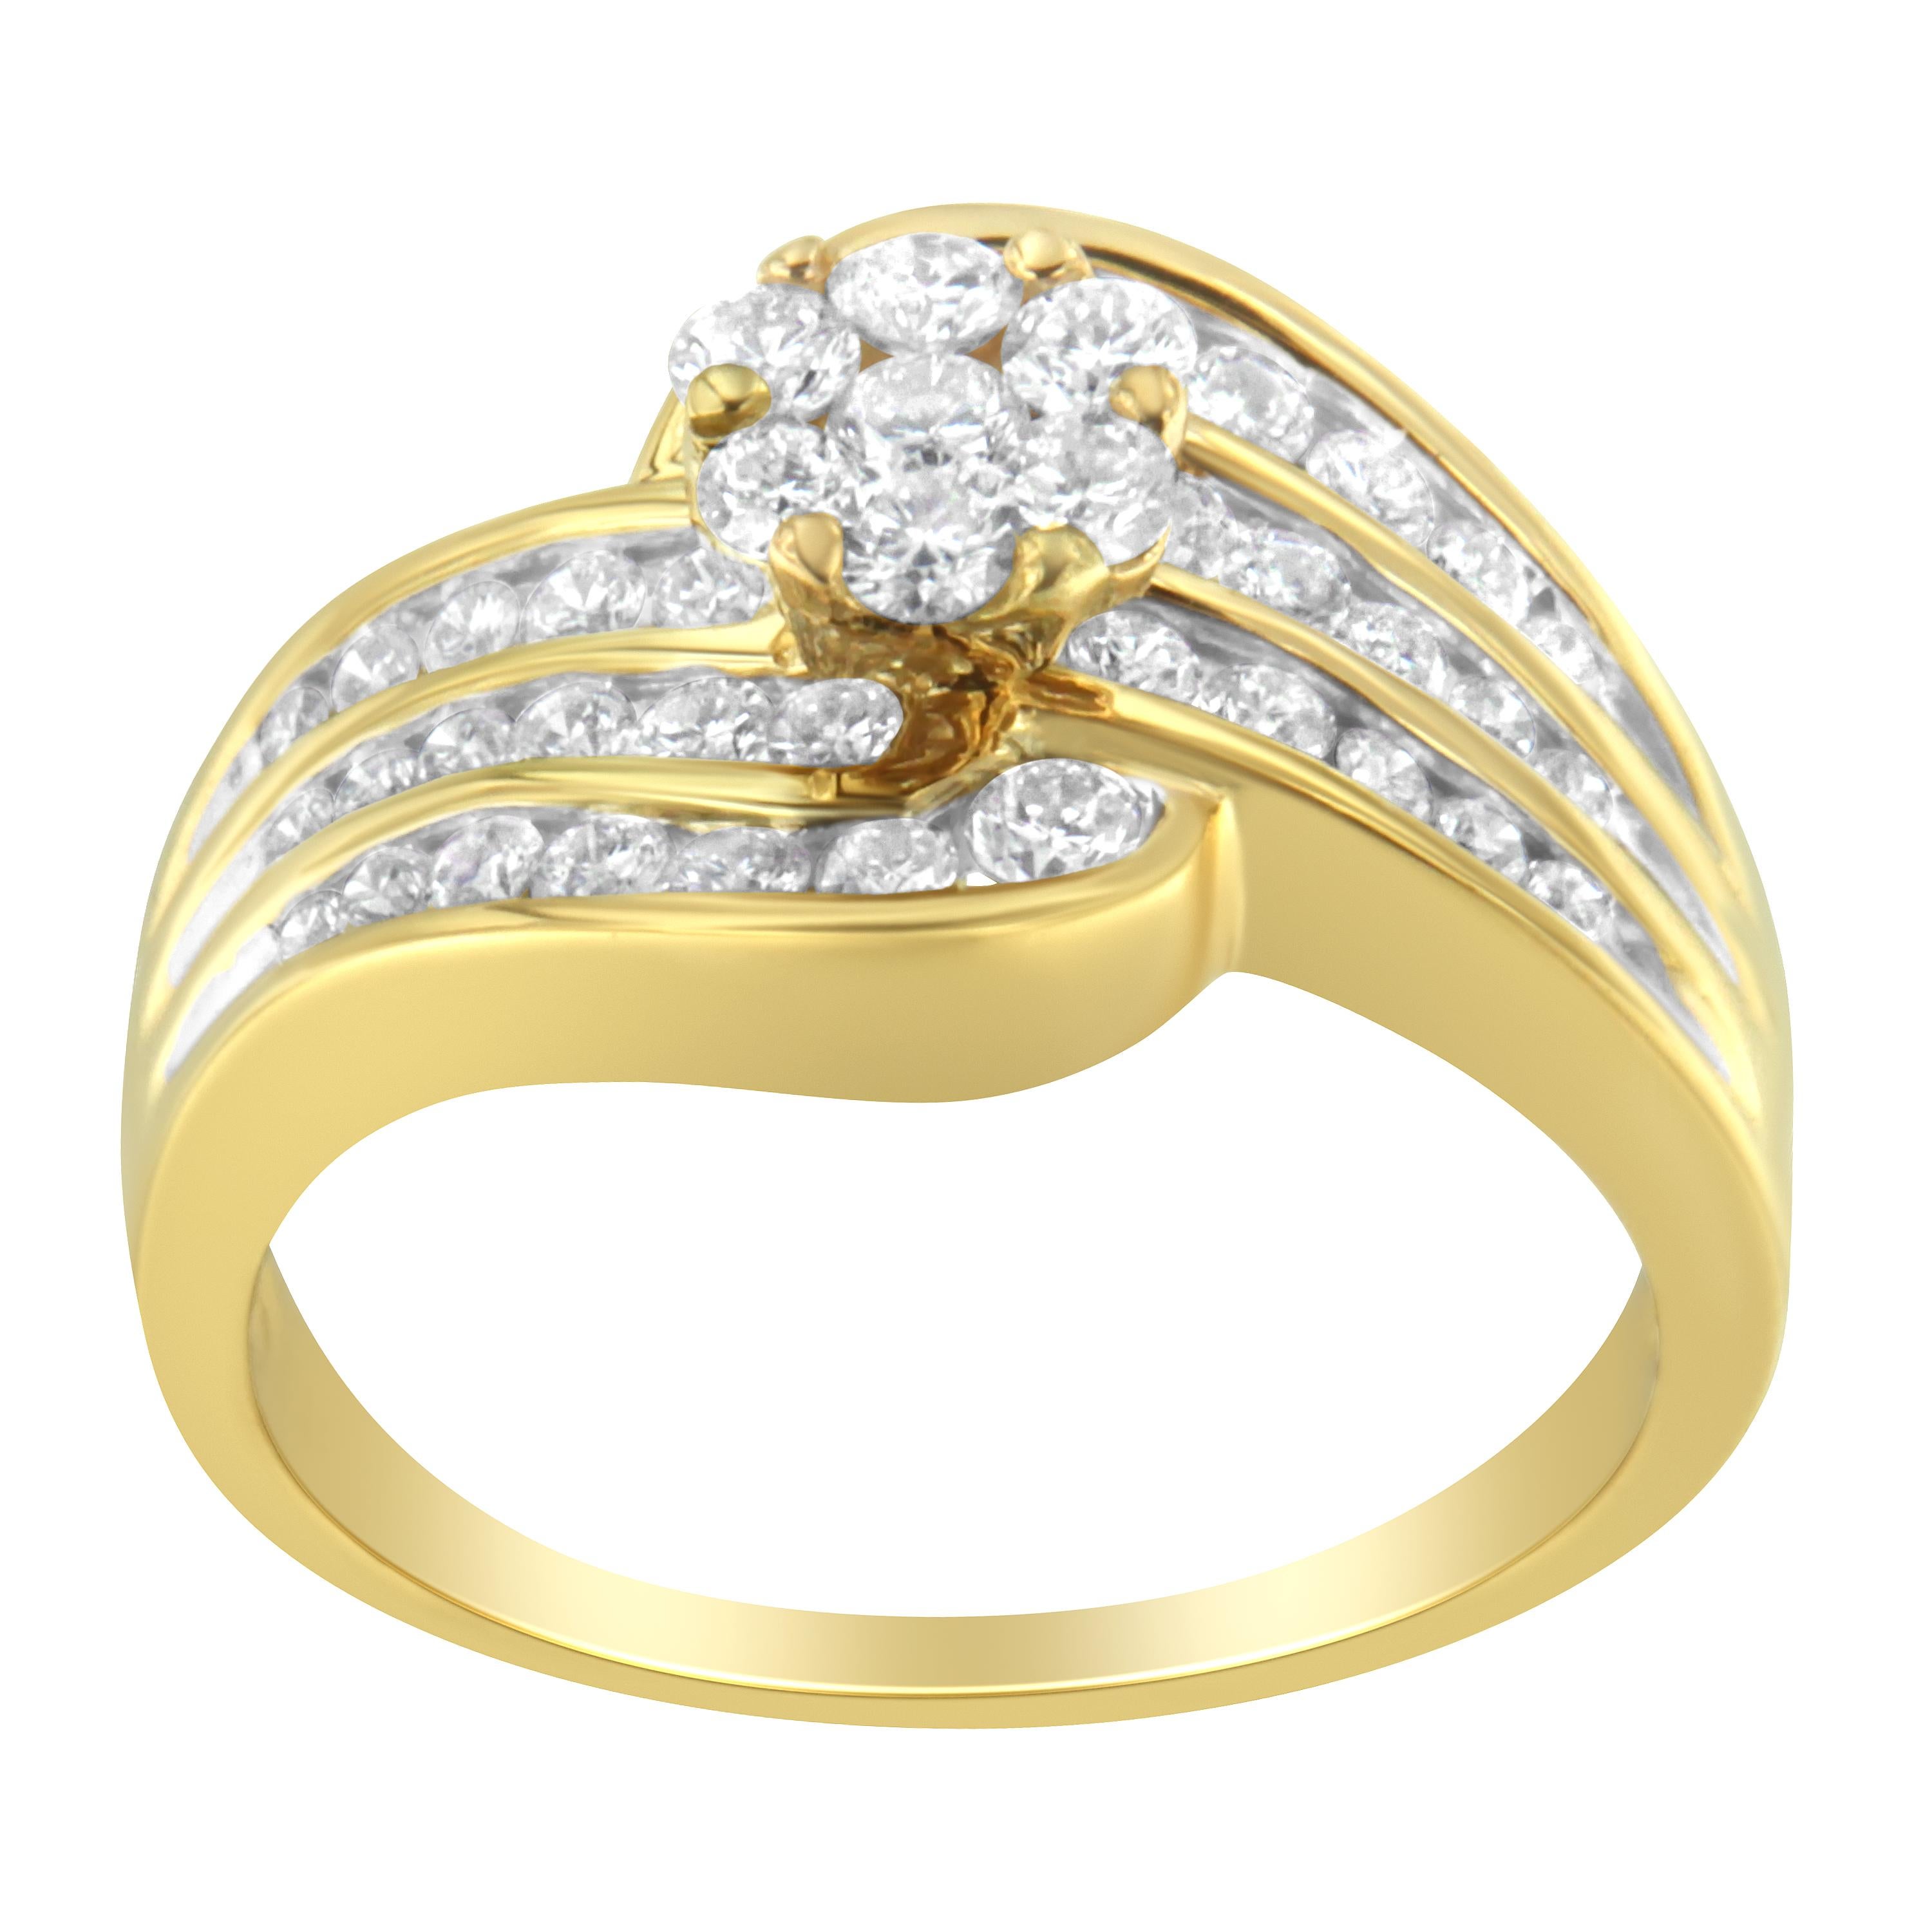 For Sale:  14K Yellow Gold 1 1/2 Carat Diamond Cocktail Bypass Ring 3